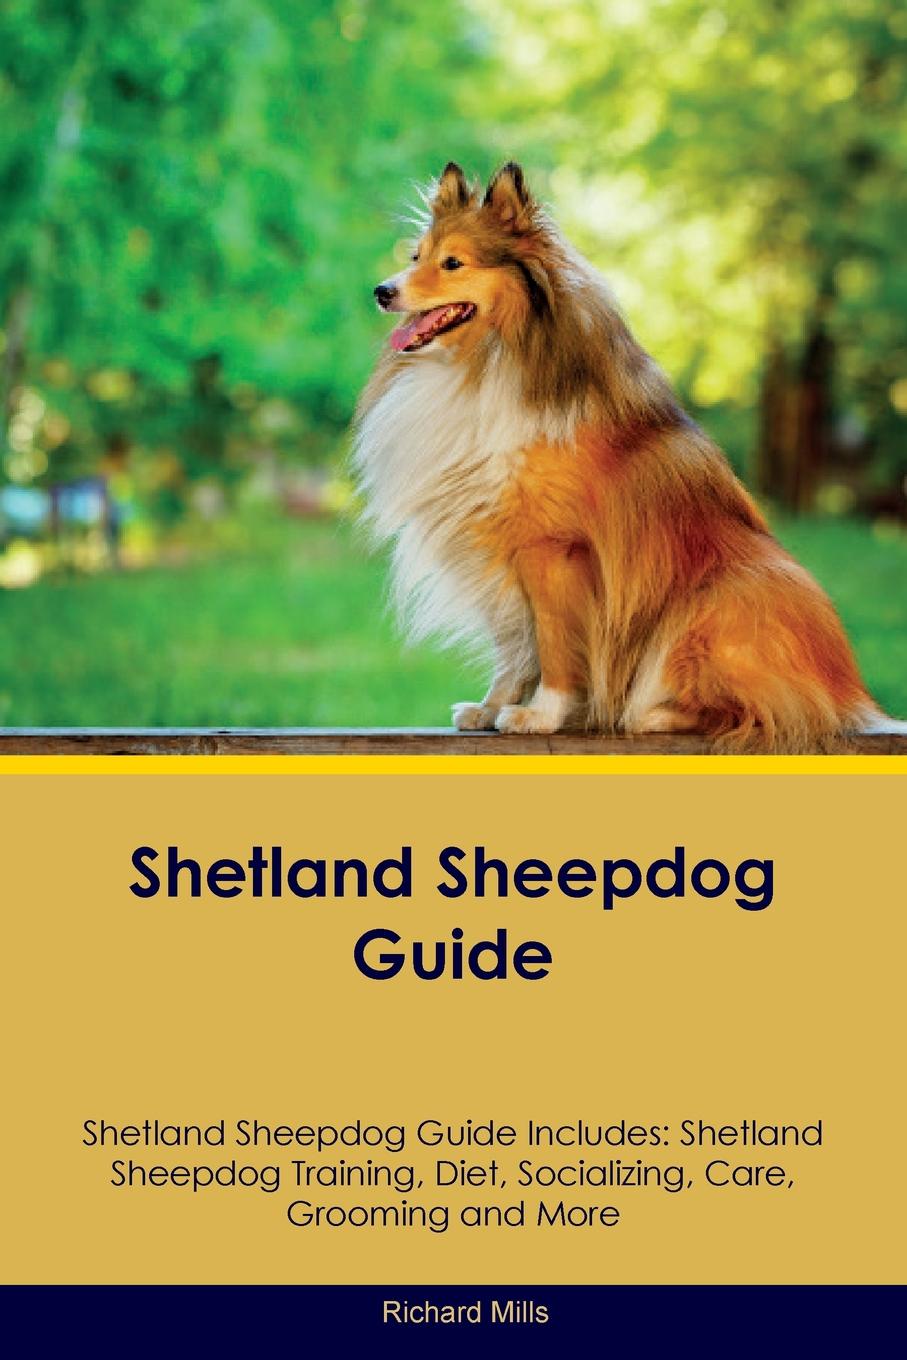 Shetland Sheepdog Guide Shetland Sheepdog Guide Includes. Shetland Sheepdog Training, Diet, Socializing, Care, Grooming, Breeding and More